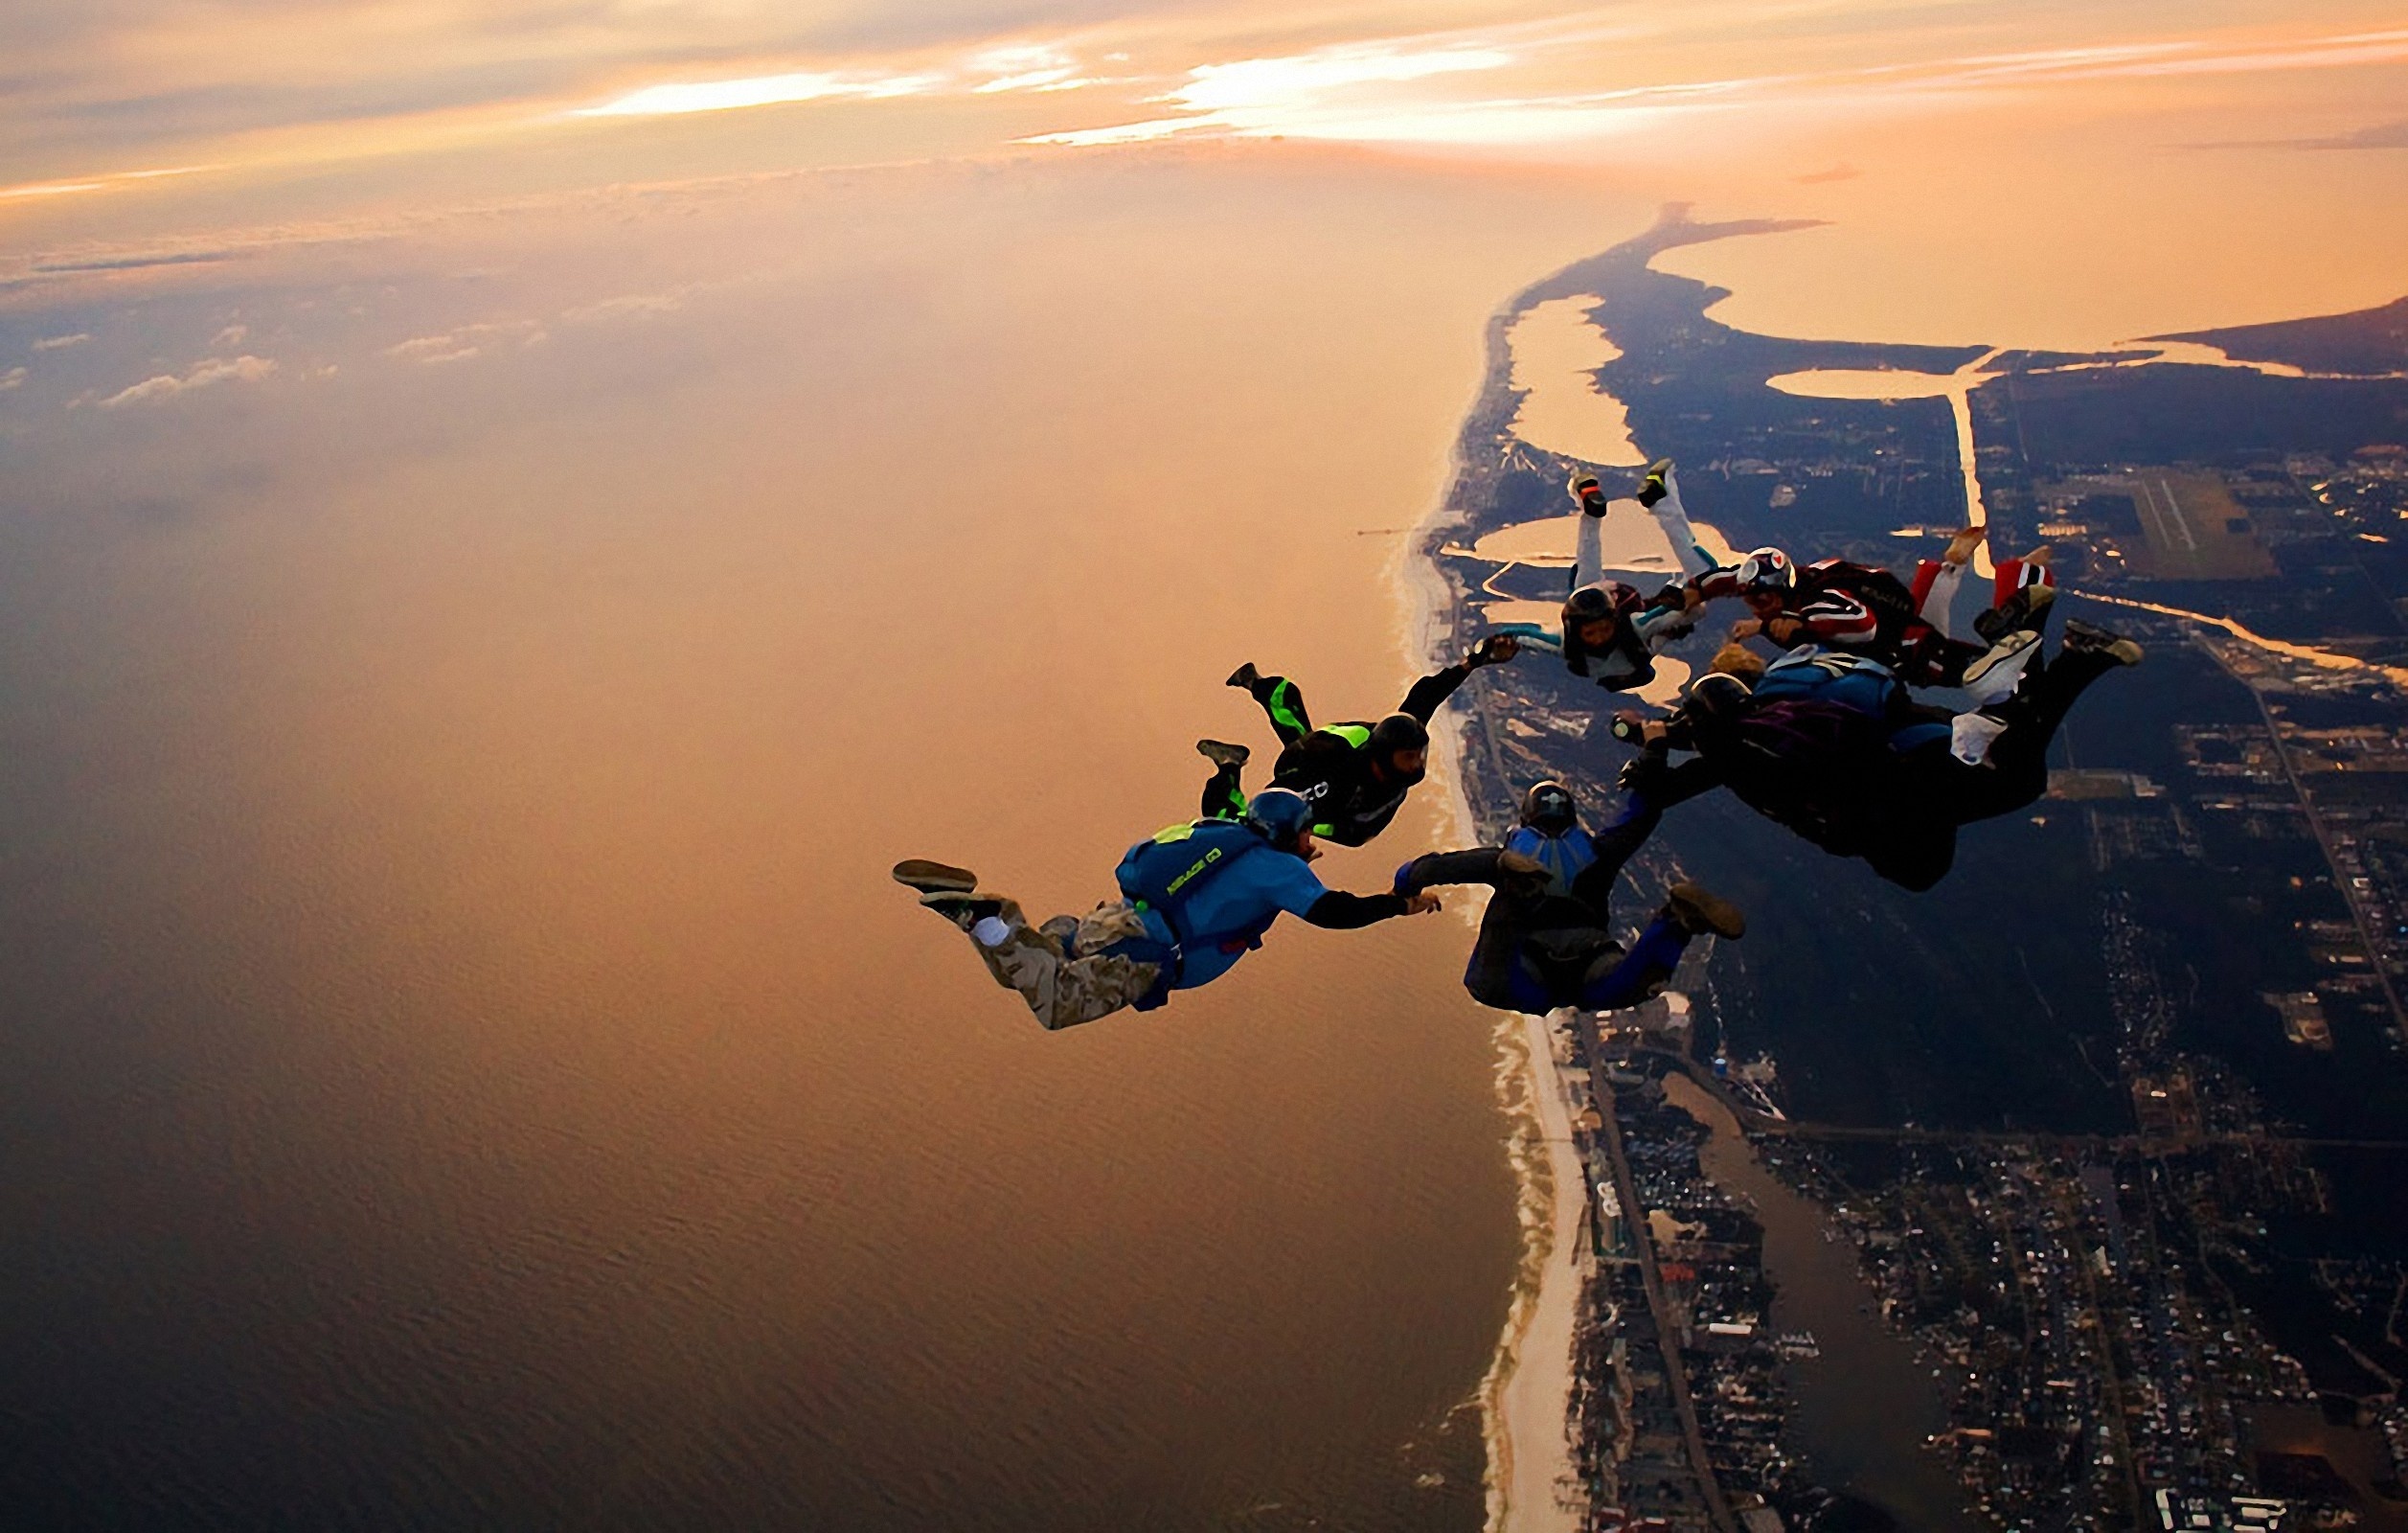 jumpers, Jump, Fly, Sky, Sea, Land, View, Cool, Parachute, Skydiving Wallpaper